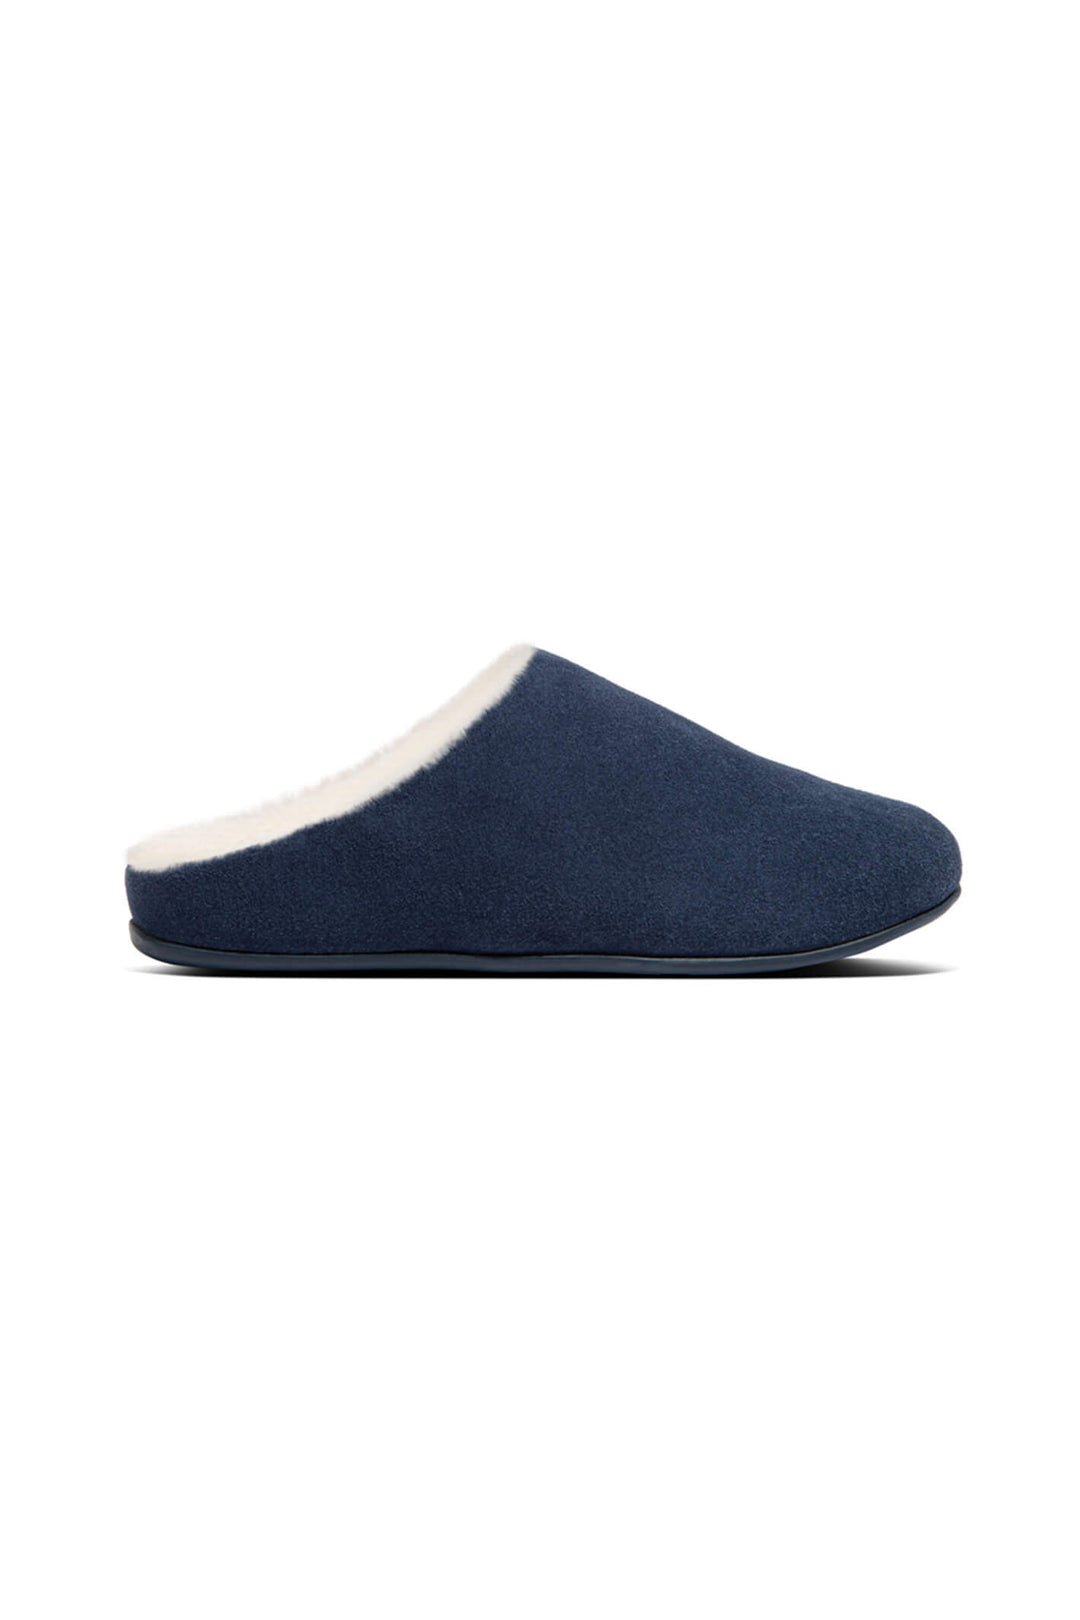 Fitflop N28-399 Chrissie Shearling Midnight Navy Slipper - Shirley Allum Boutique